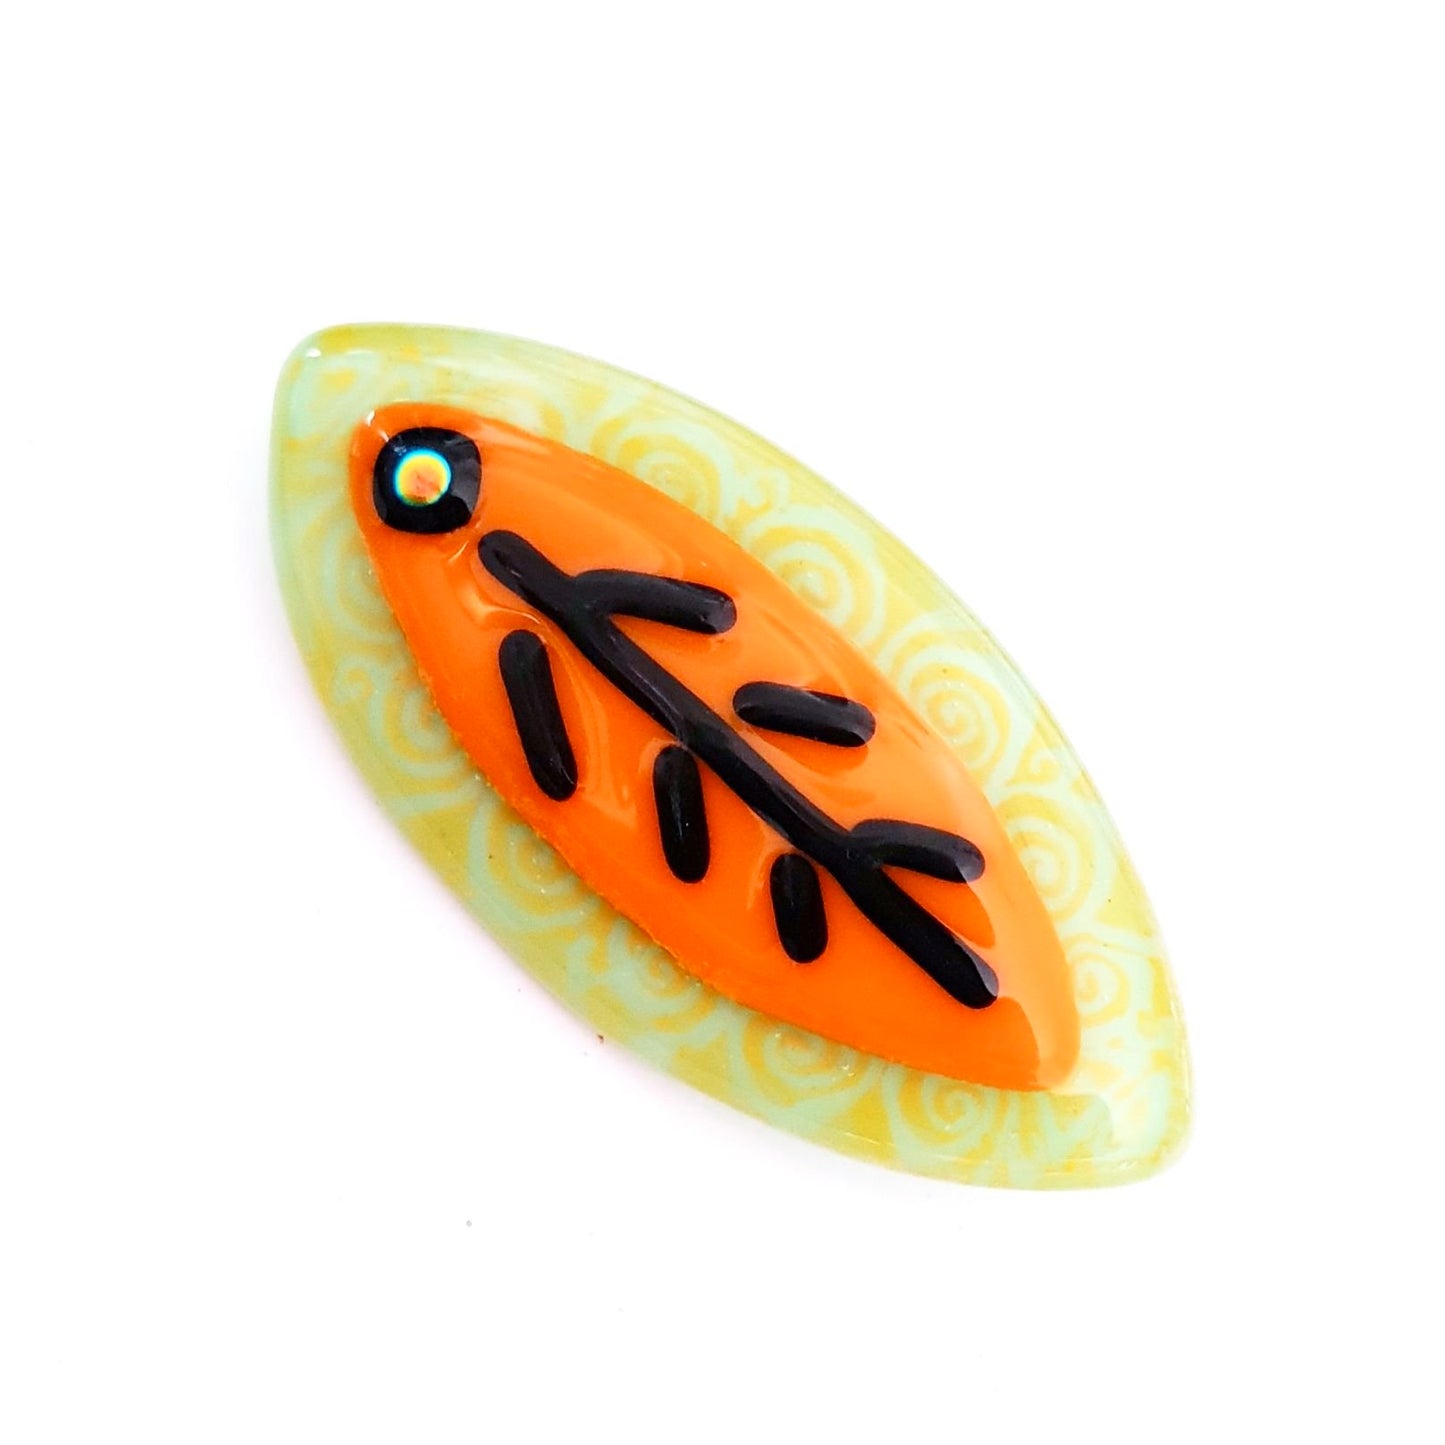 Glass Brooch Handpainted Abstract Leaf